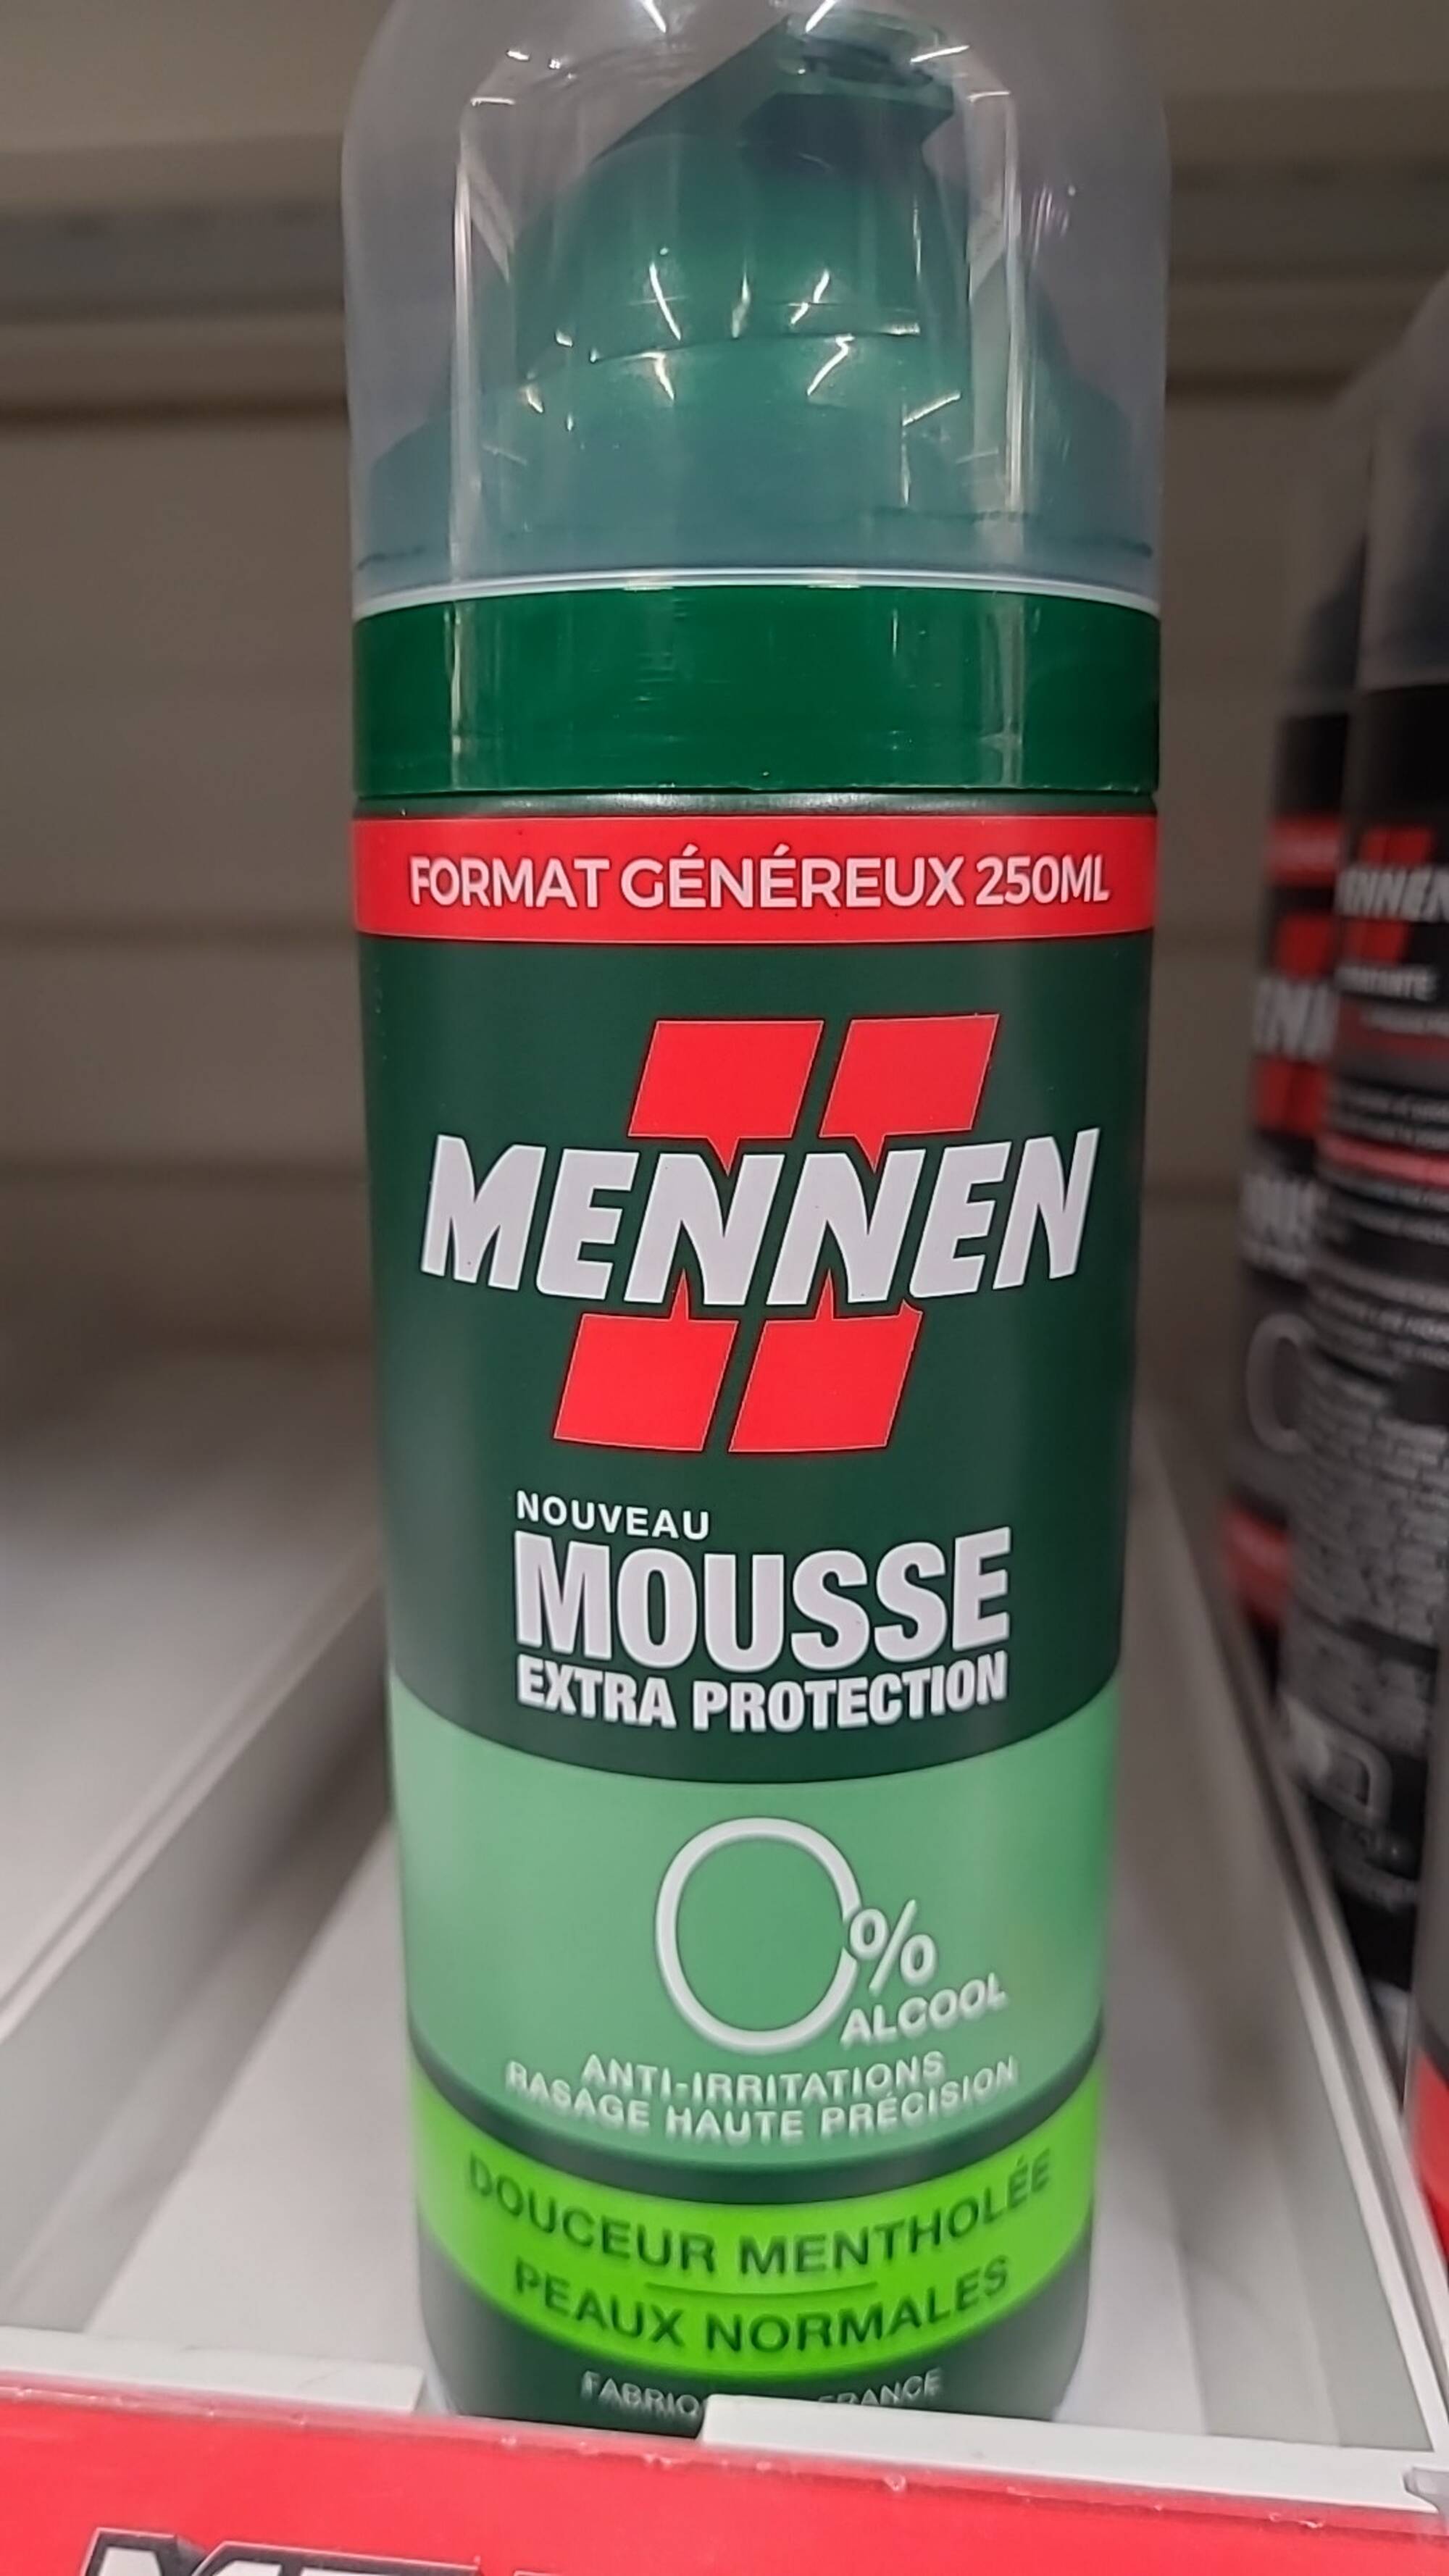 MENNEN - Mousse extra protection